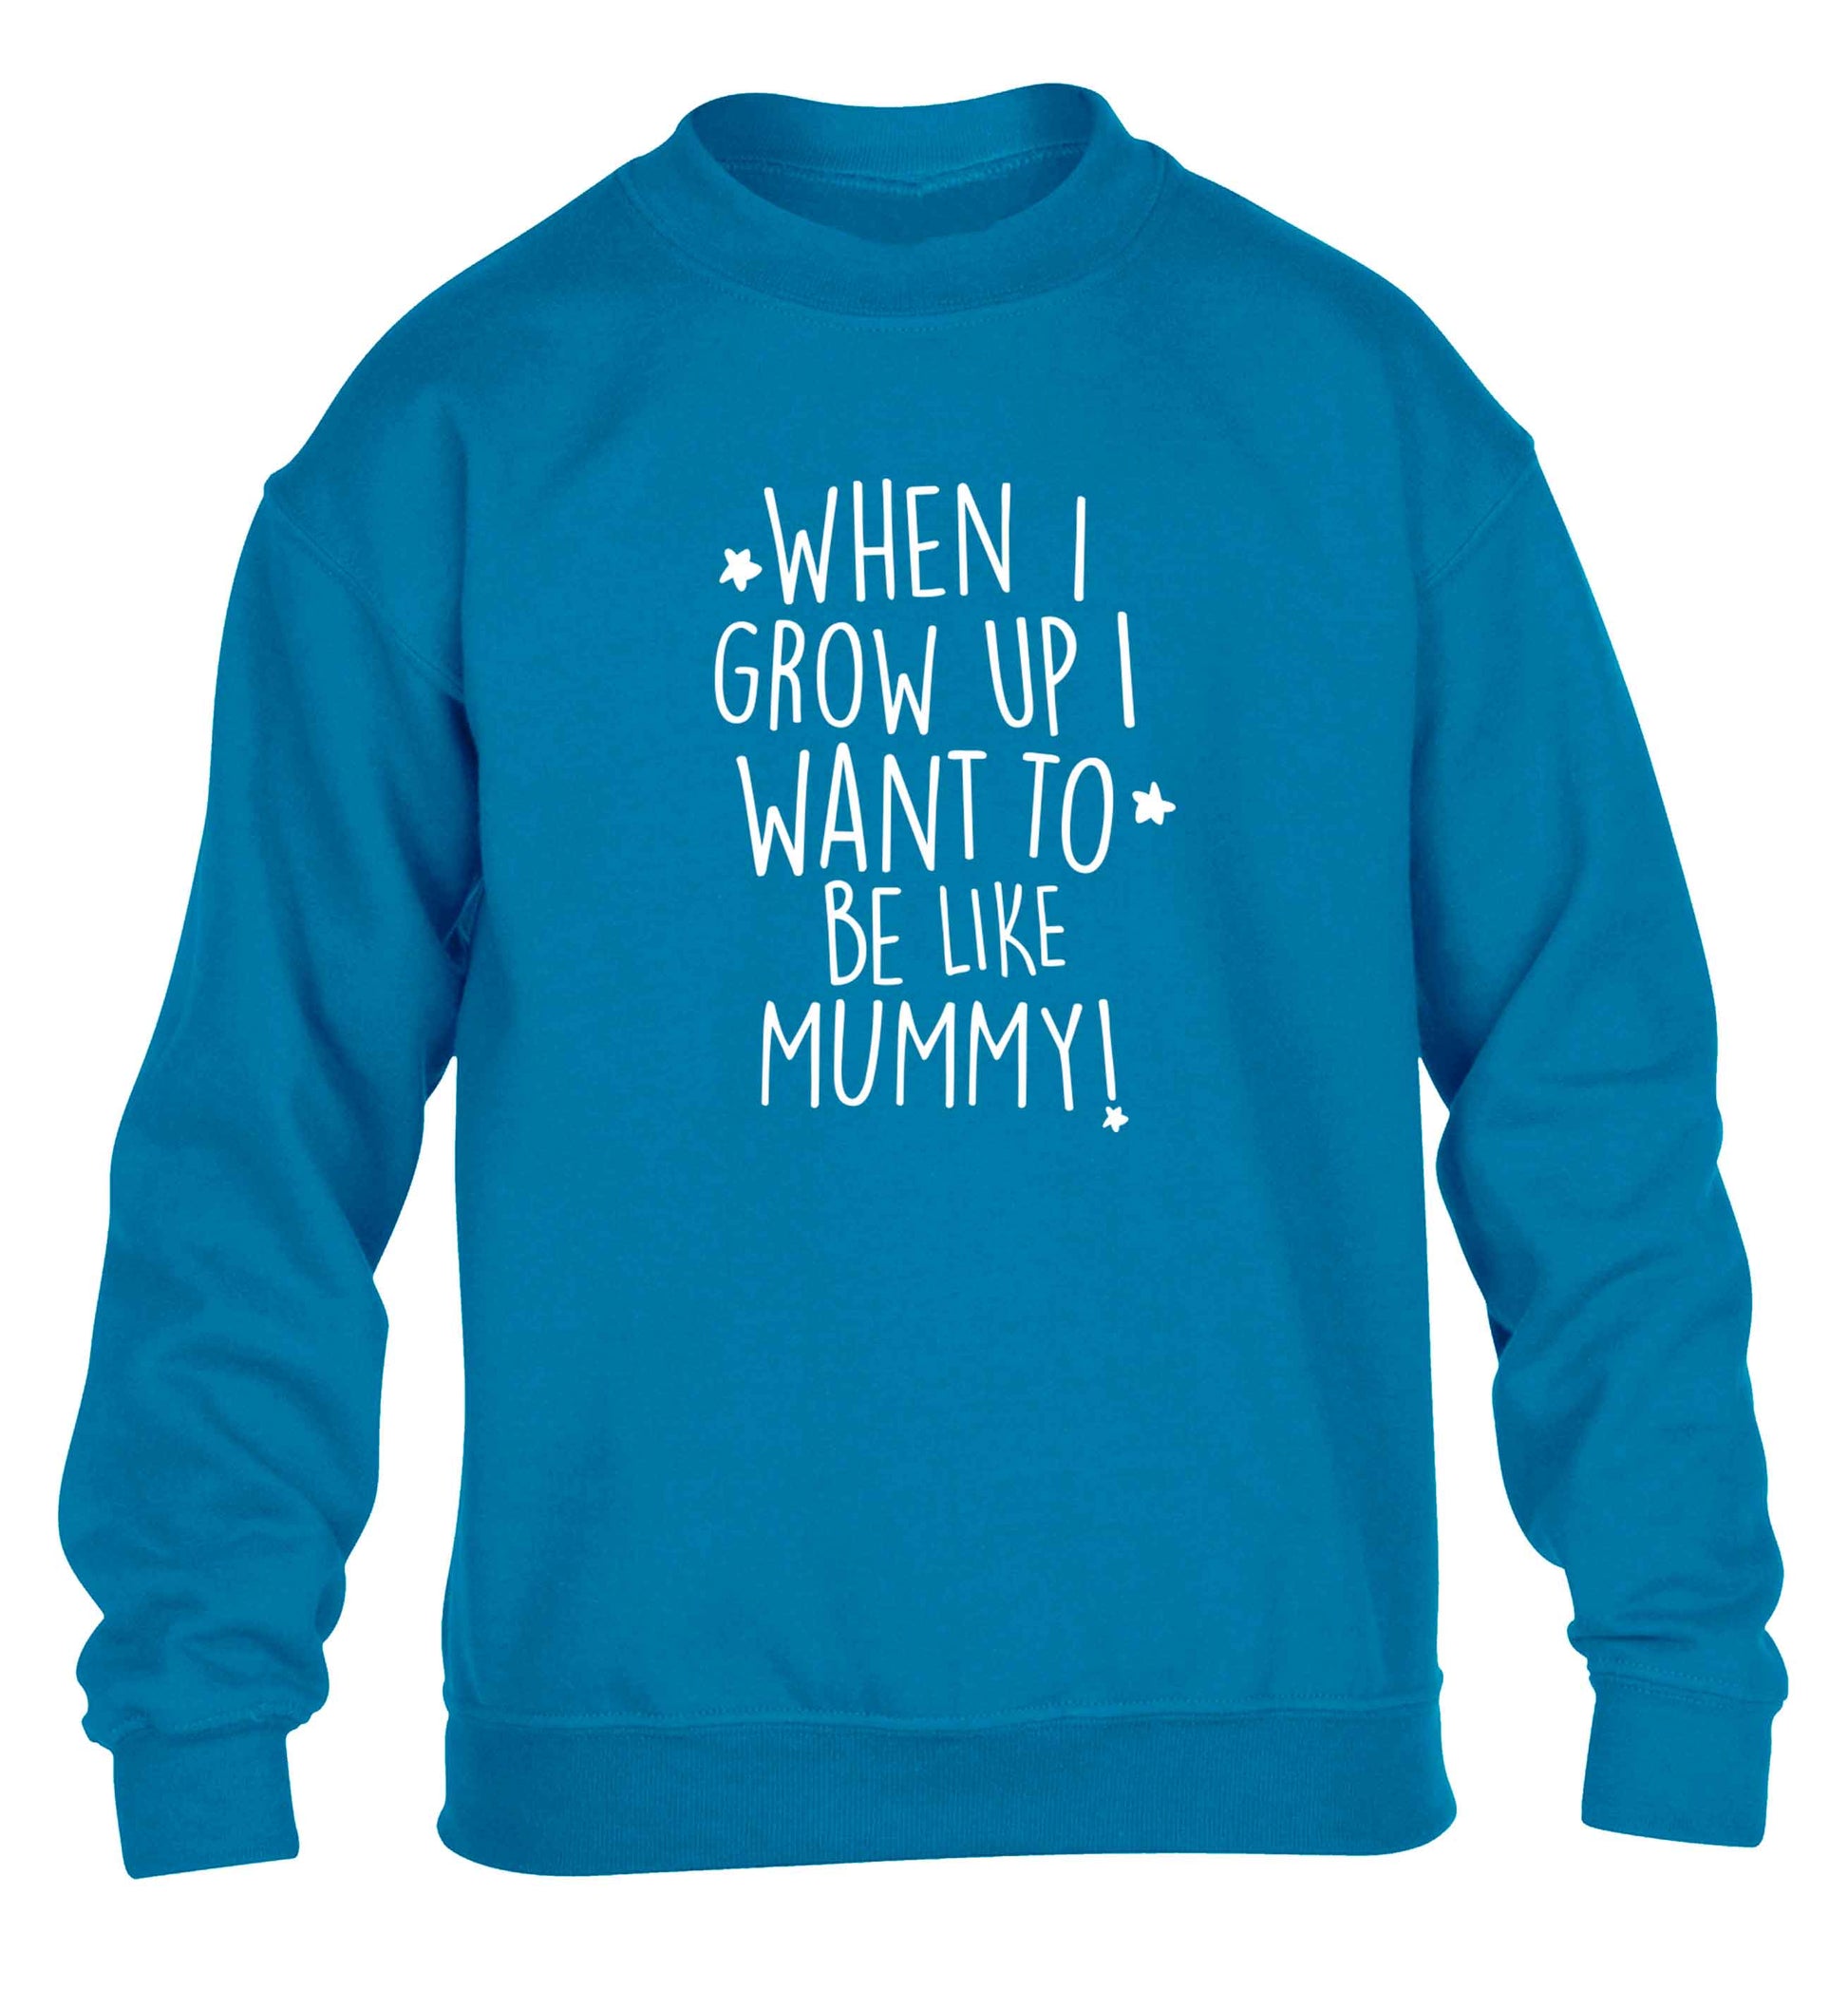 When I grow up I want to be like my mummy children's blue sweater 12-13 Years